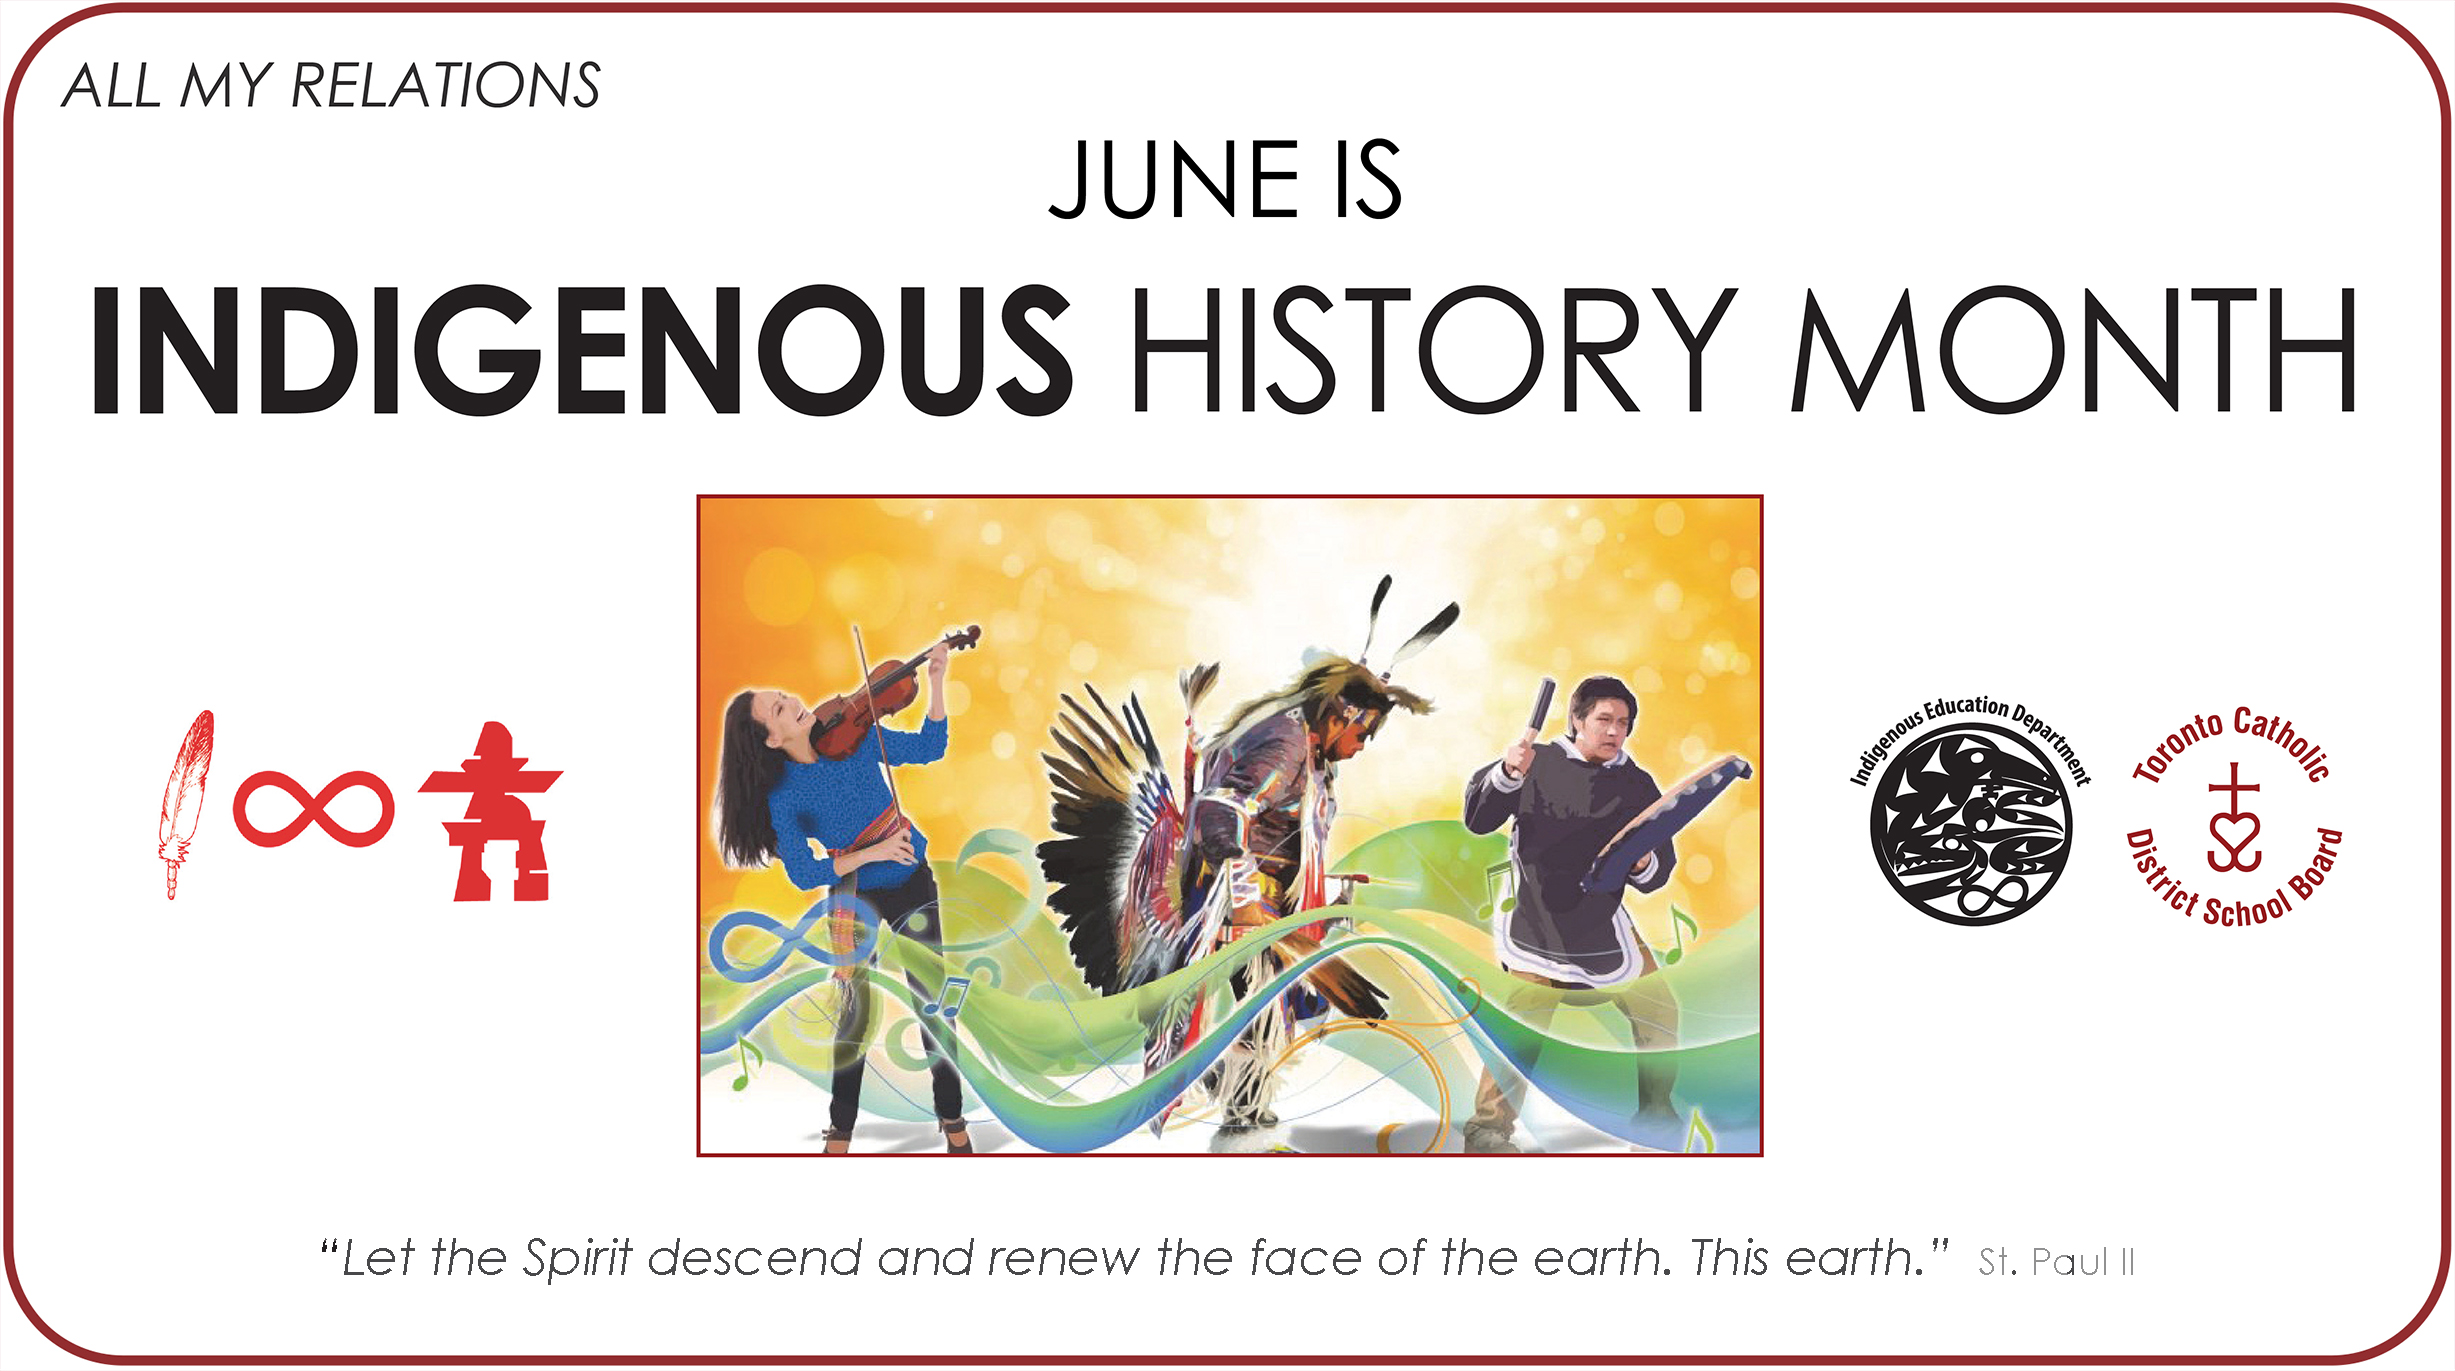 Banner for National Indigenous History Month. On the top left reads the theme "ALL MY RELATIONS" and below it in the top center "JUNE IS INDIGENOUS HISTORY MONTH." In the middle is a graphic of three Indigenous performers playing music and dancing. On the right of the graphic is the circular logo of the TCDSB, and the circular logo of the TCDSB's Indigenous Education Department. In the bottom centre of the banner is the quote "Let the Spirit descend and renew the face of the earth. This earth." by St. Paul II.